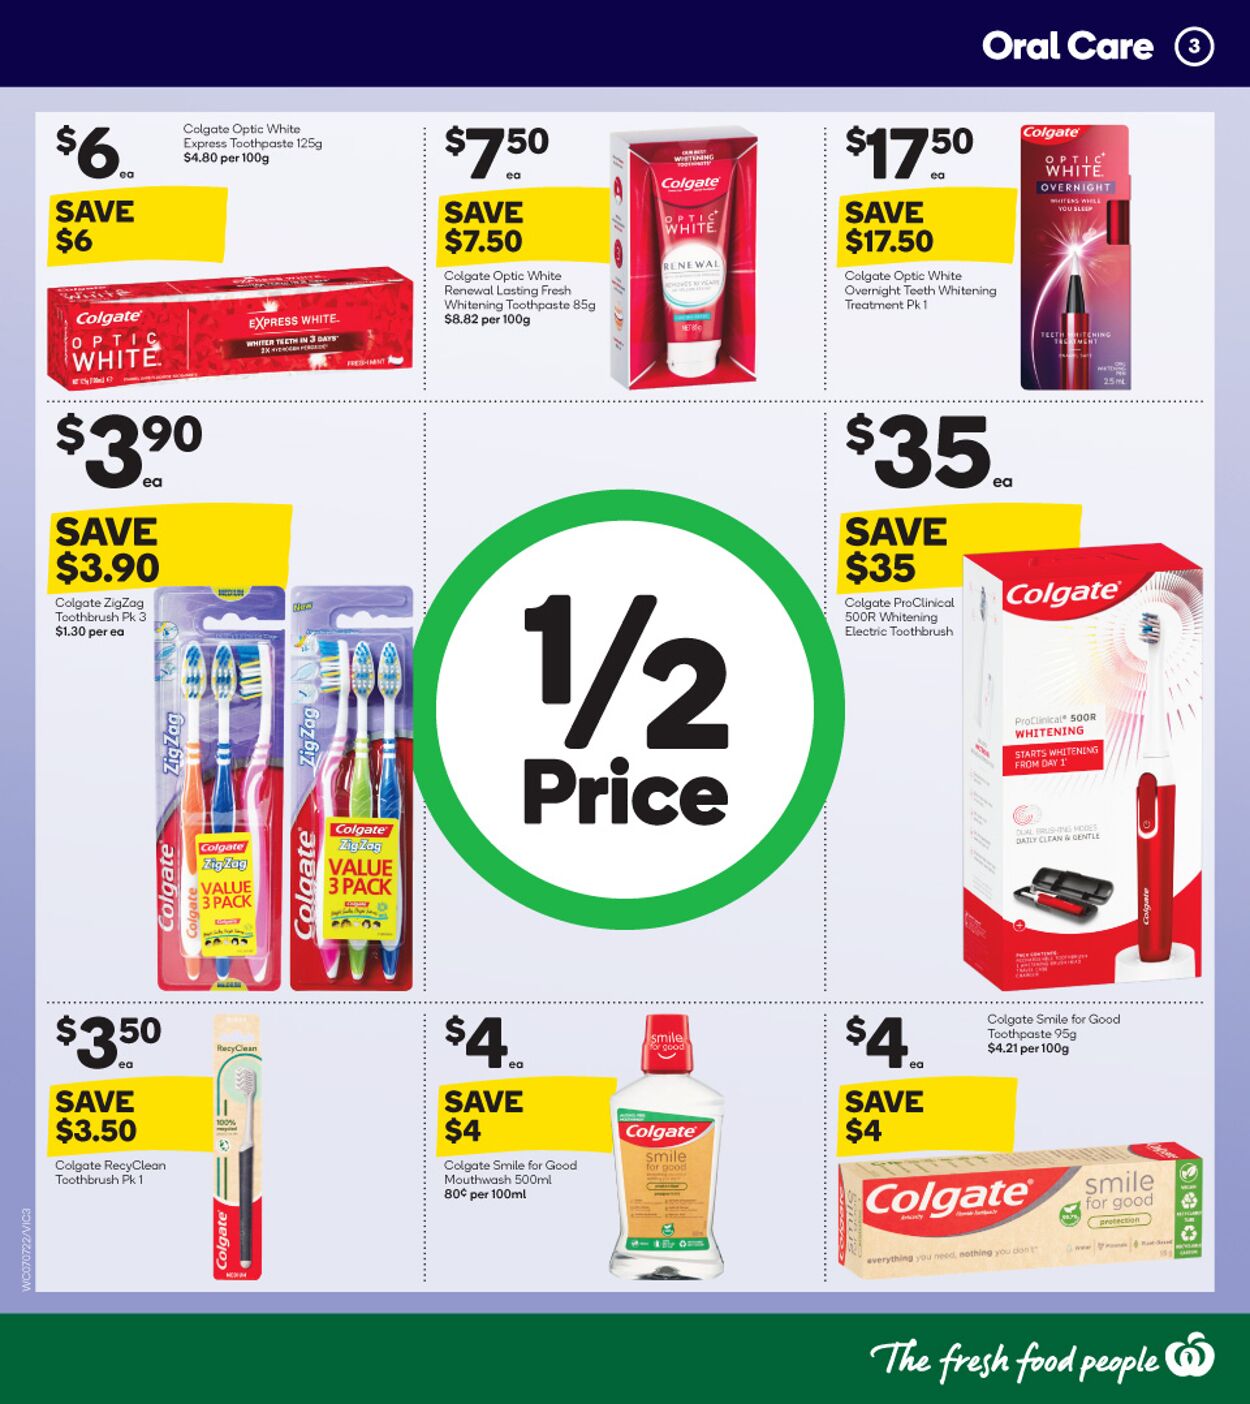 Catalogue Woolworths 07.07.2021 - 13.07.2021